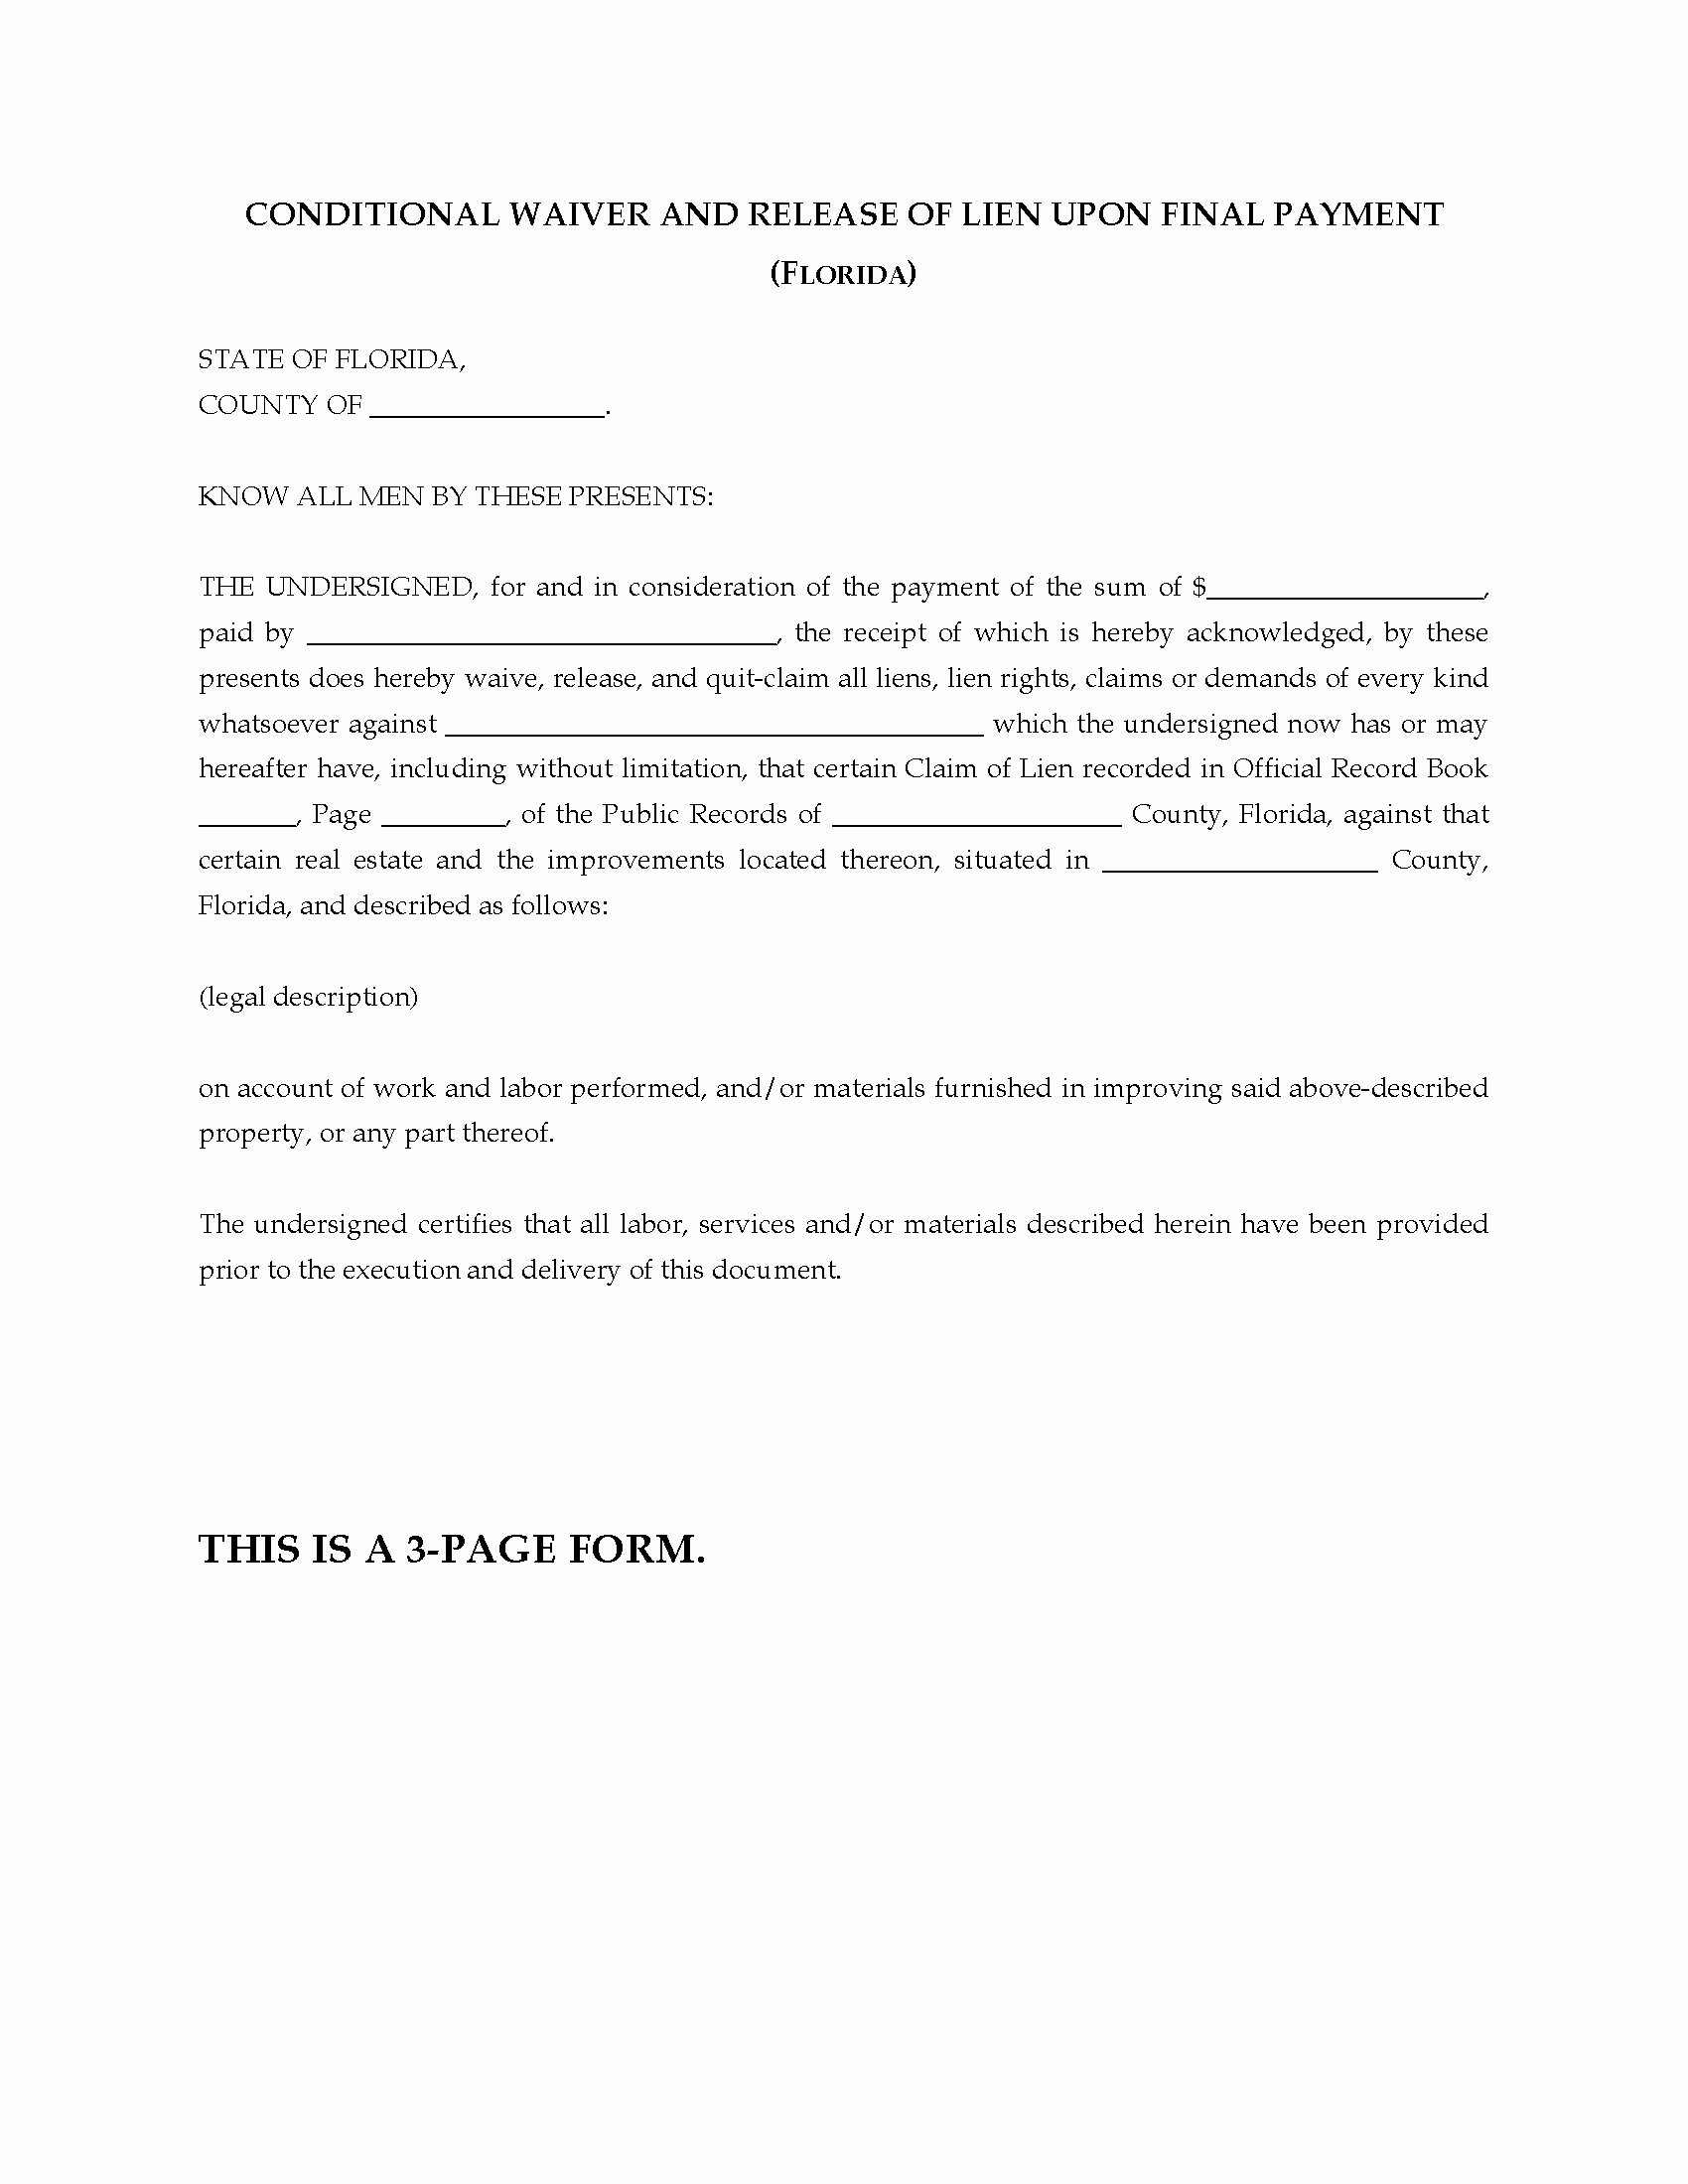 Lien Waiver form Template Lovely Florida Conditional Waiver and Release Of Lien Final